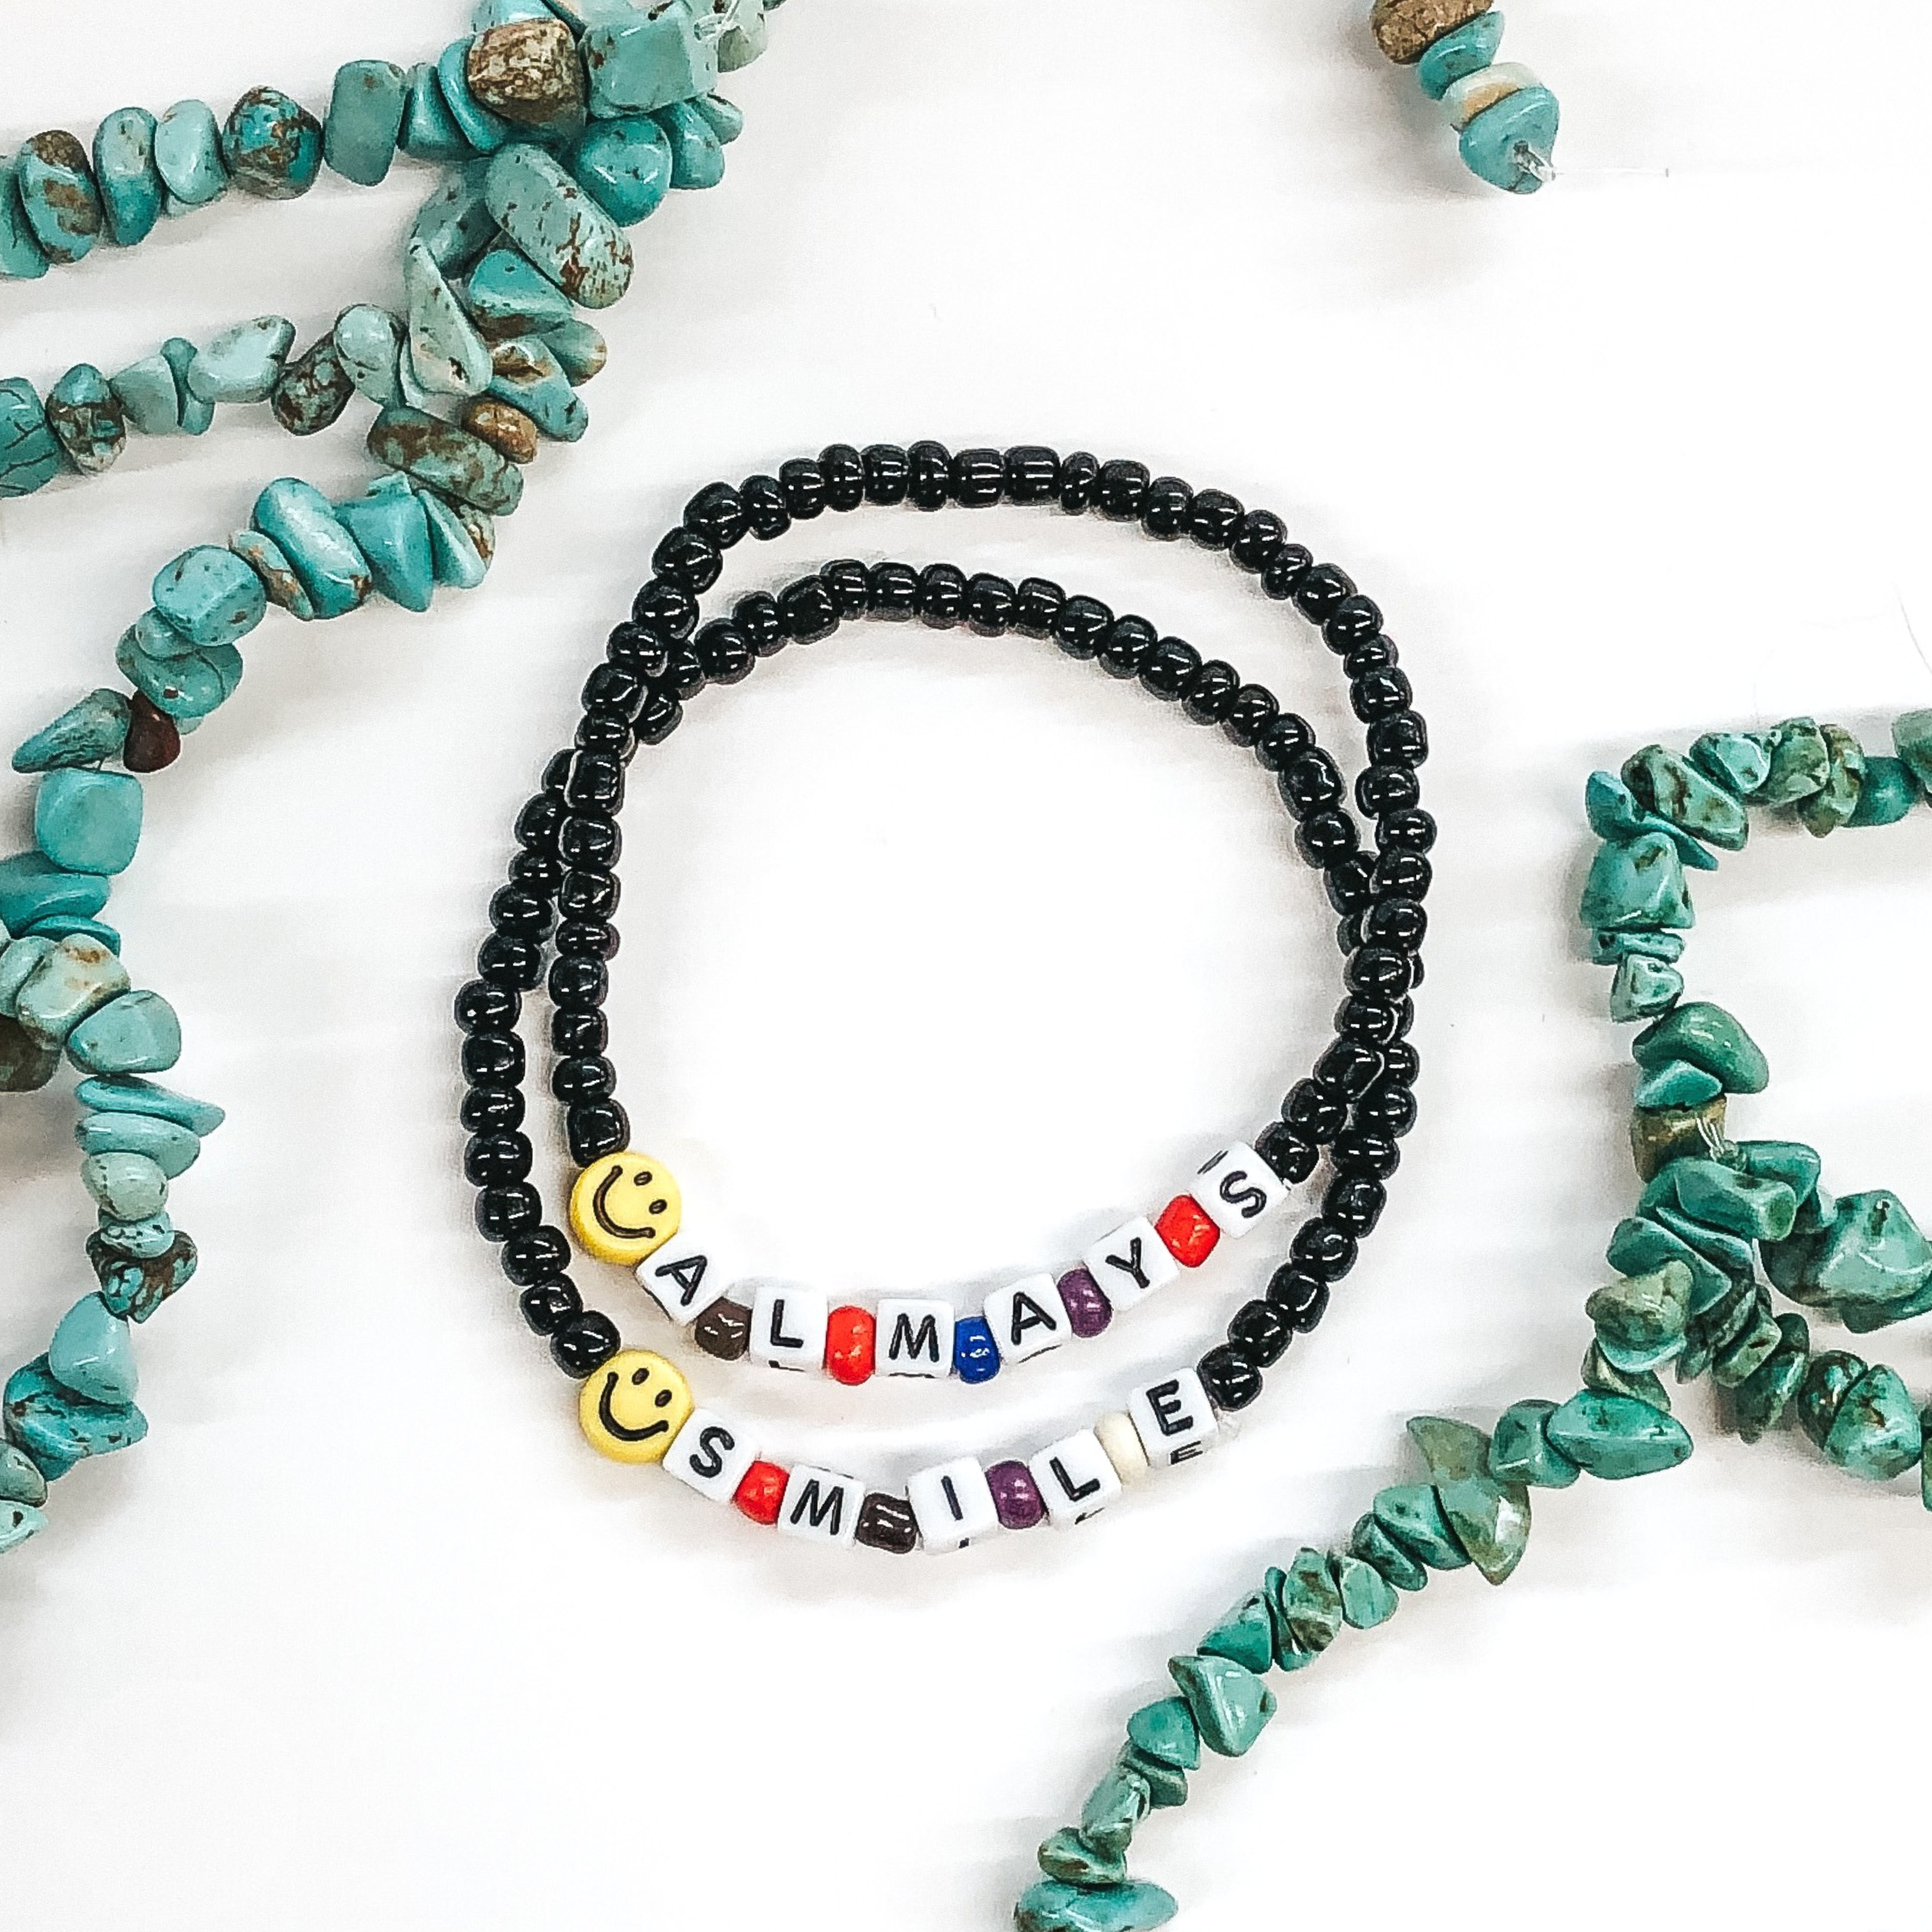 2 black beaded bracelets with smiley face beads and lettering that says always smile